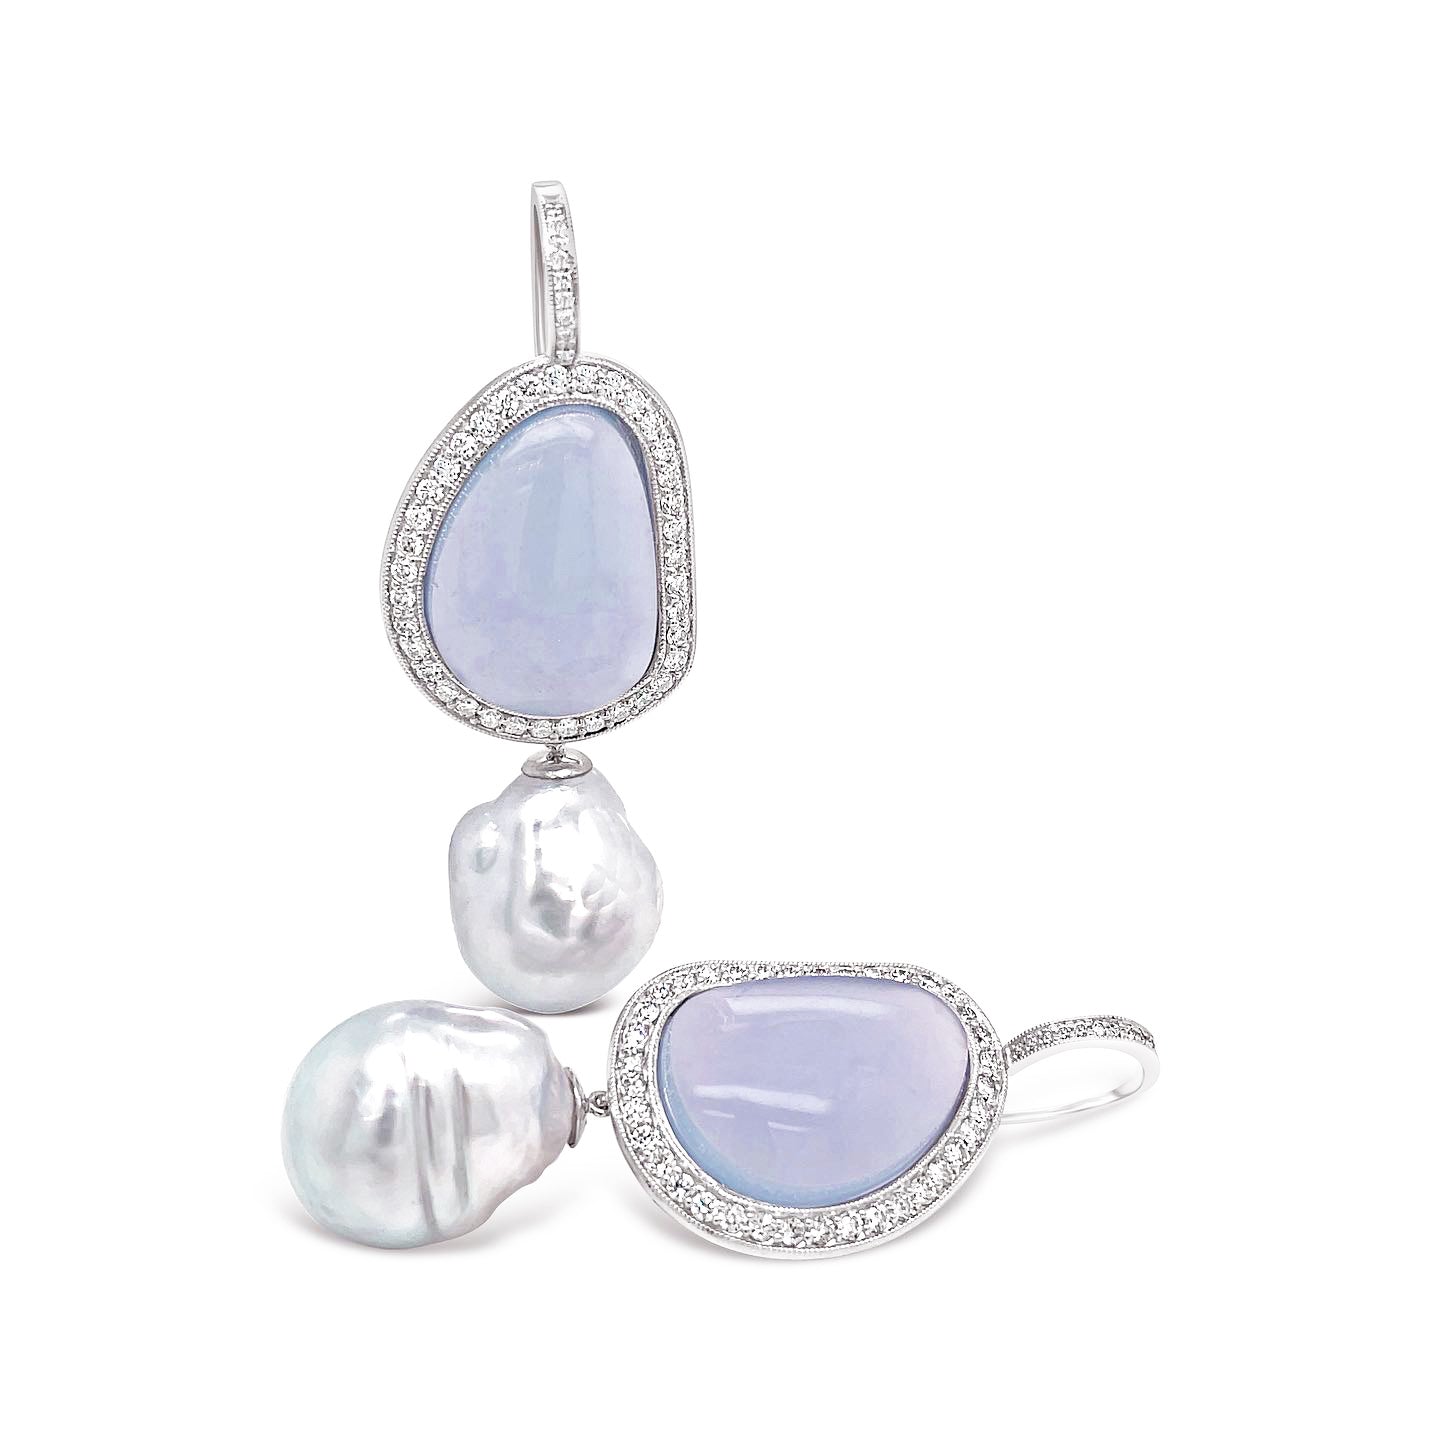 These Pearl Jewels Won the 2022 The Cultured Pearl Association of America Design Competition - Ashleigh Branstetter® 